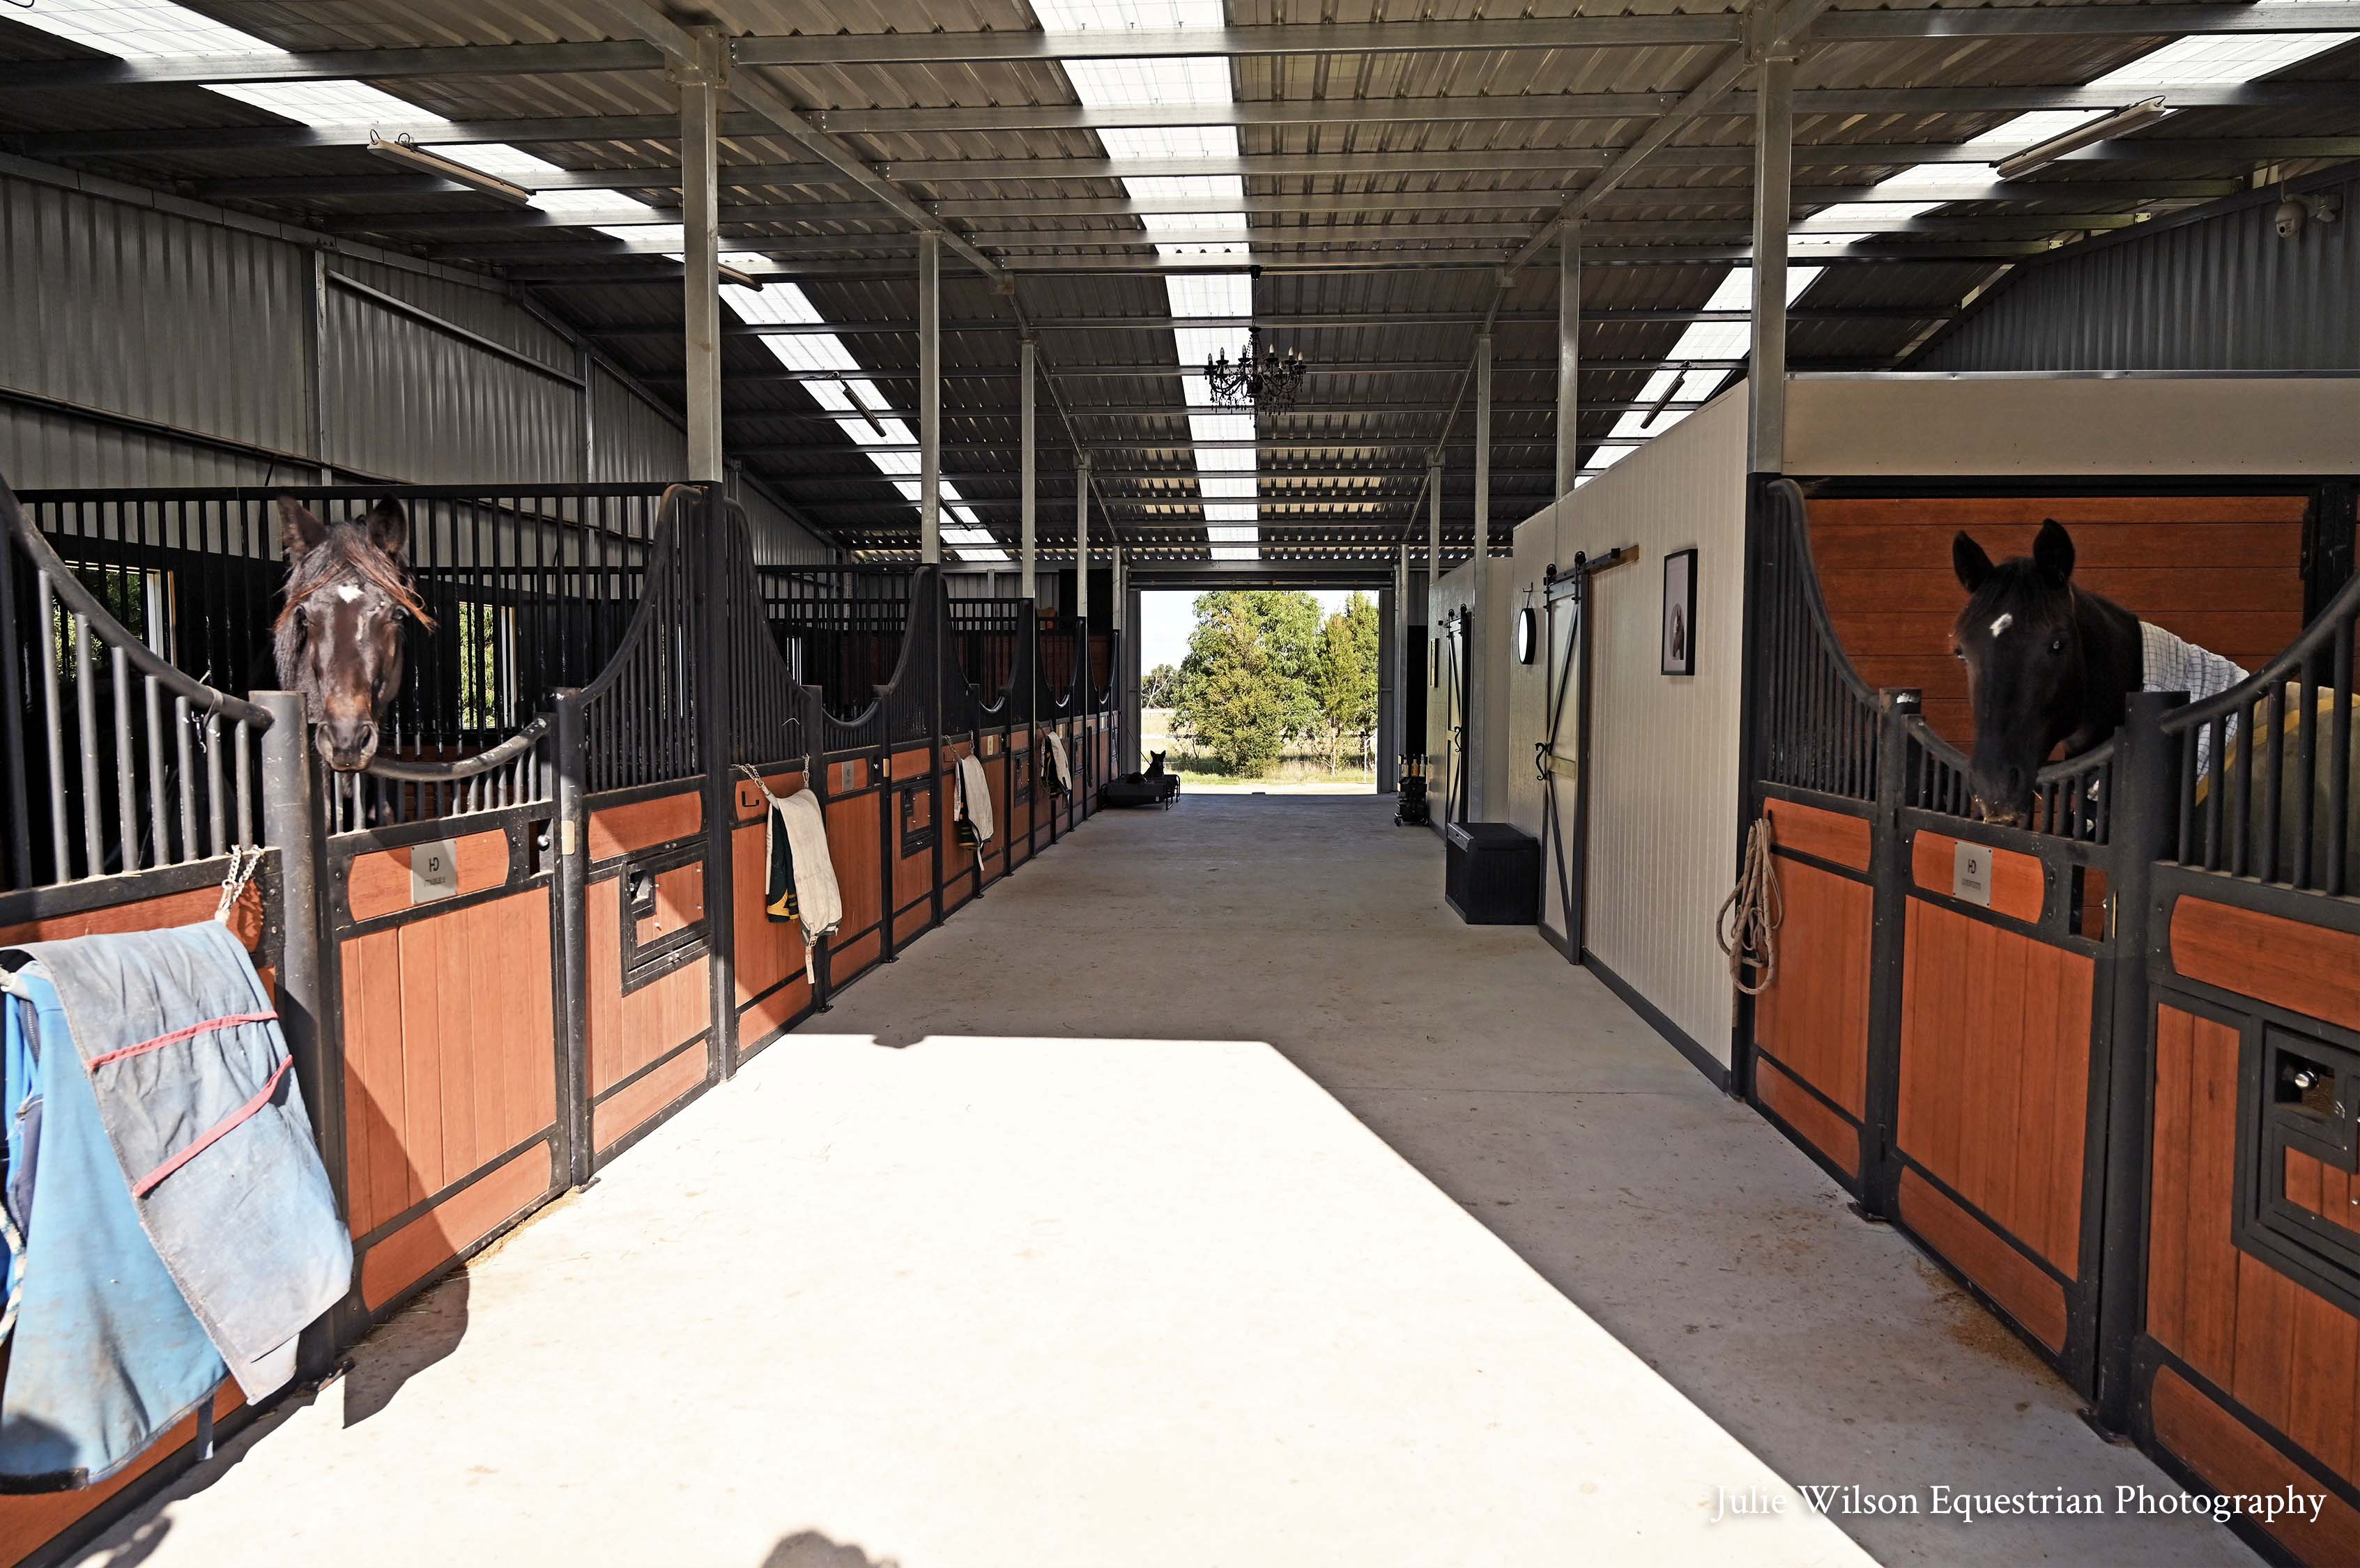 Labertouche indoor arena and stables 